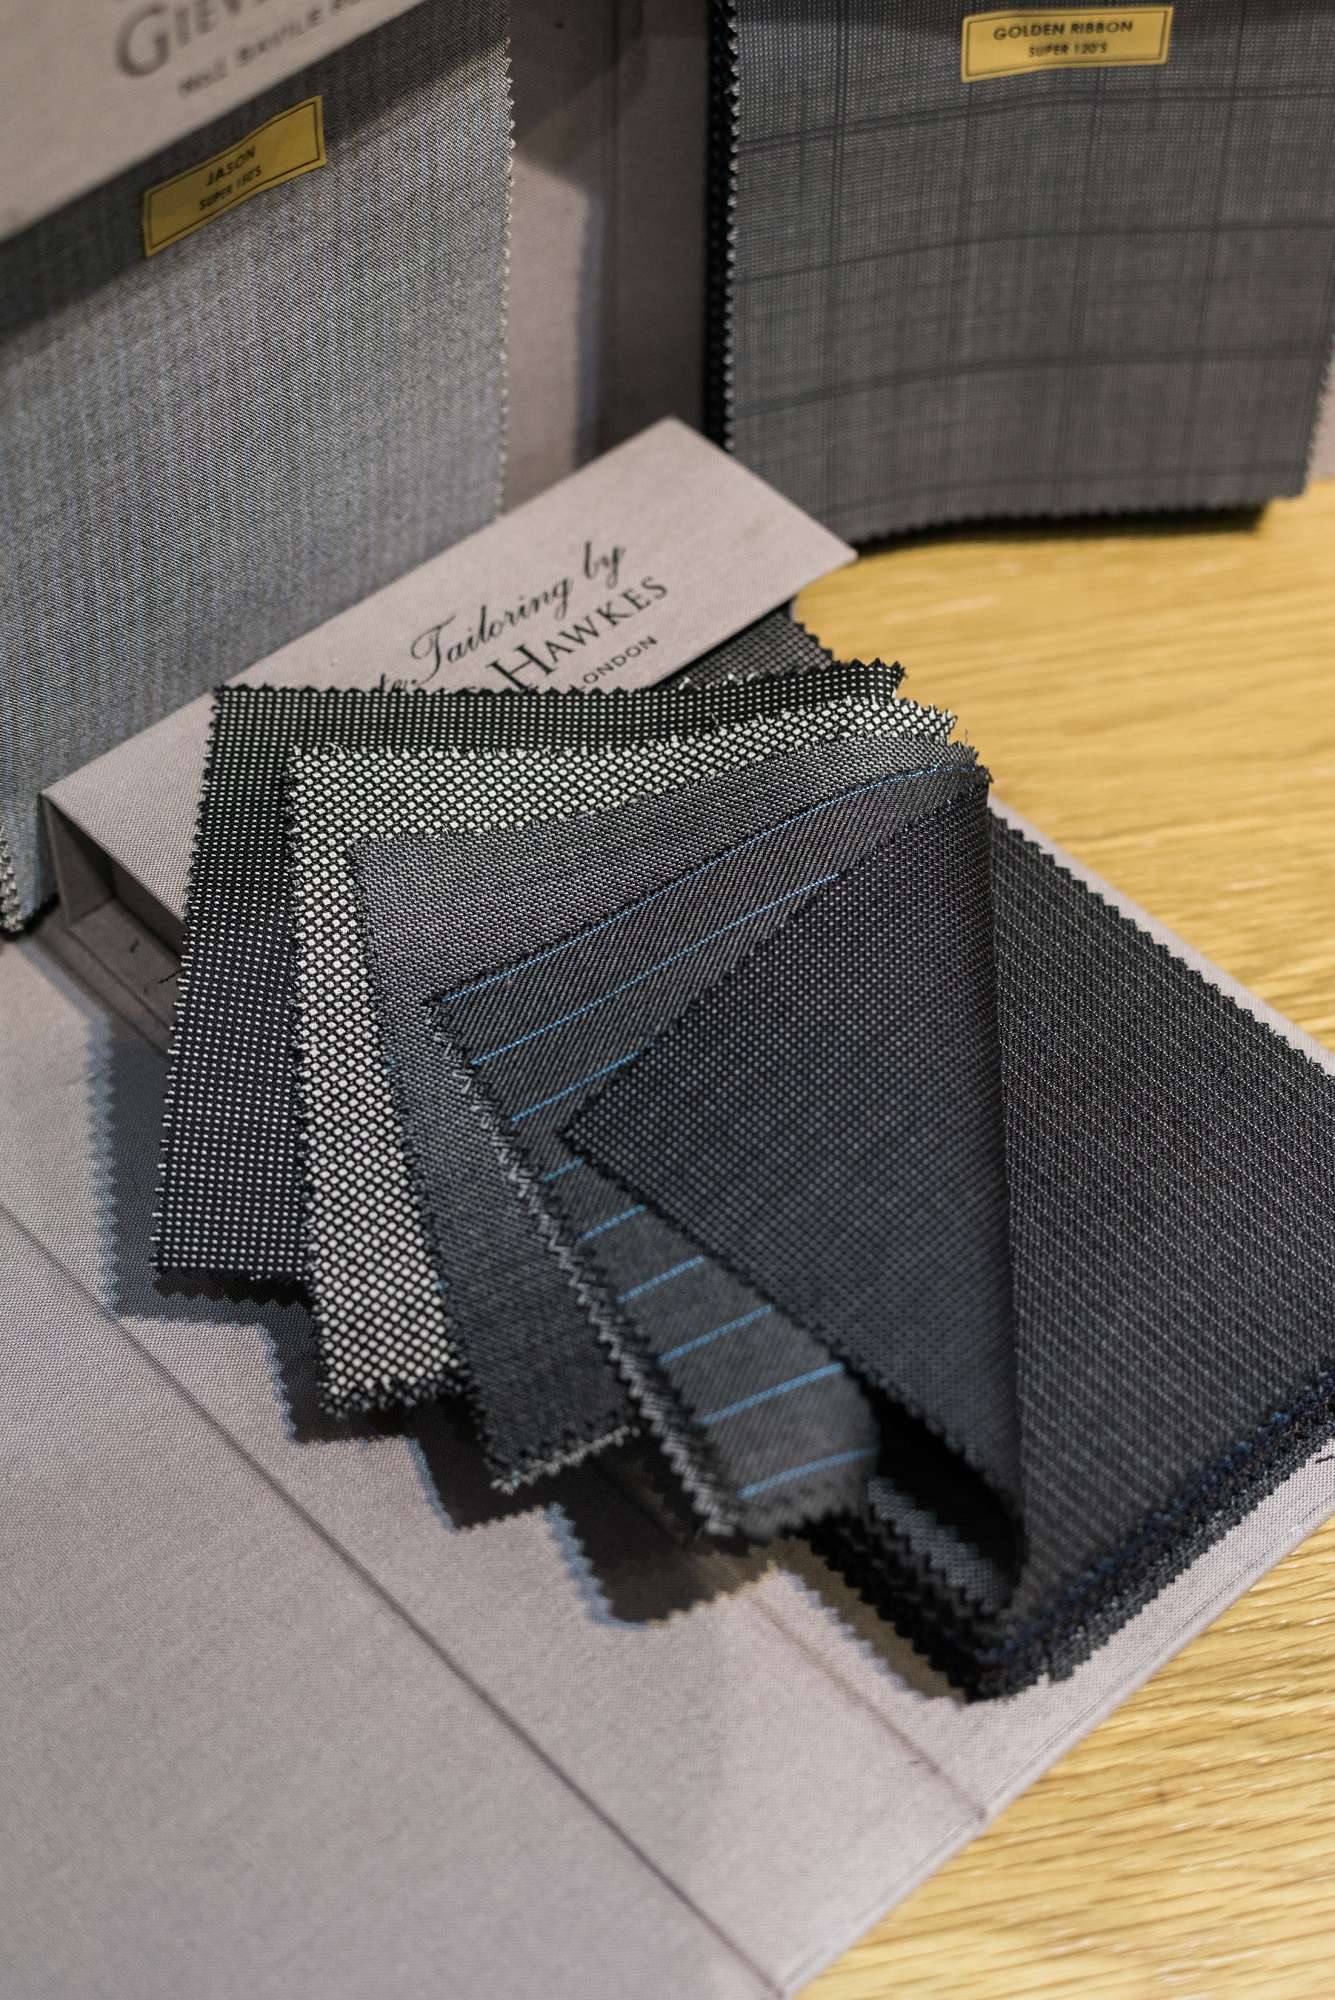 Gieves & Hawkes has opened a private tailoring store at the Mandarin Oriental Hong Kong.